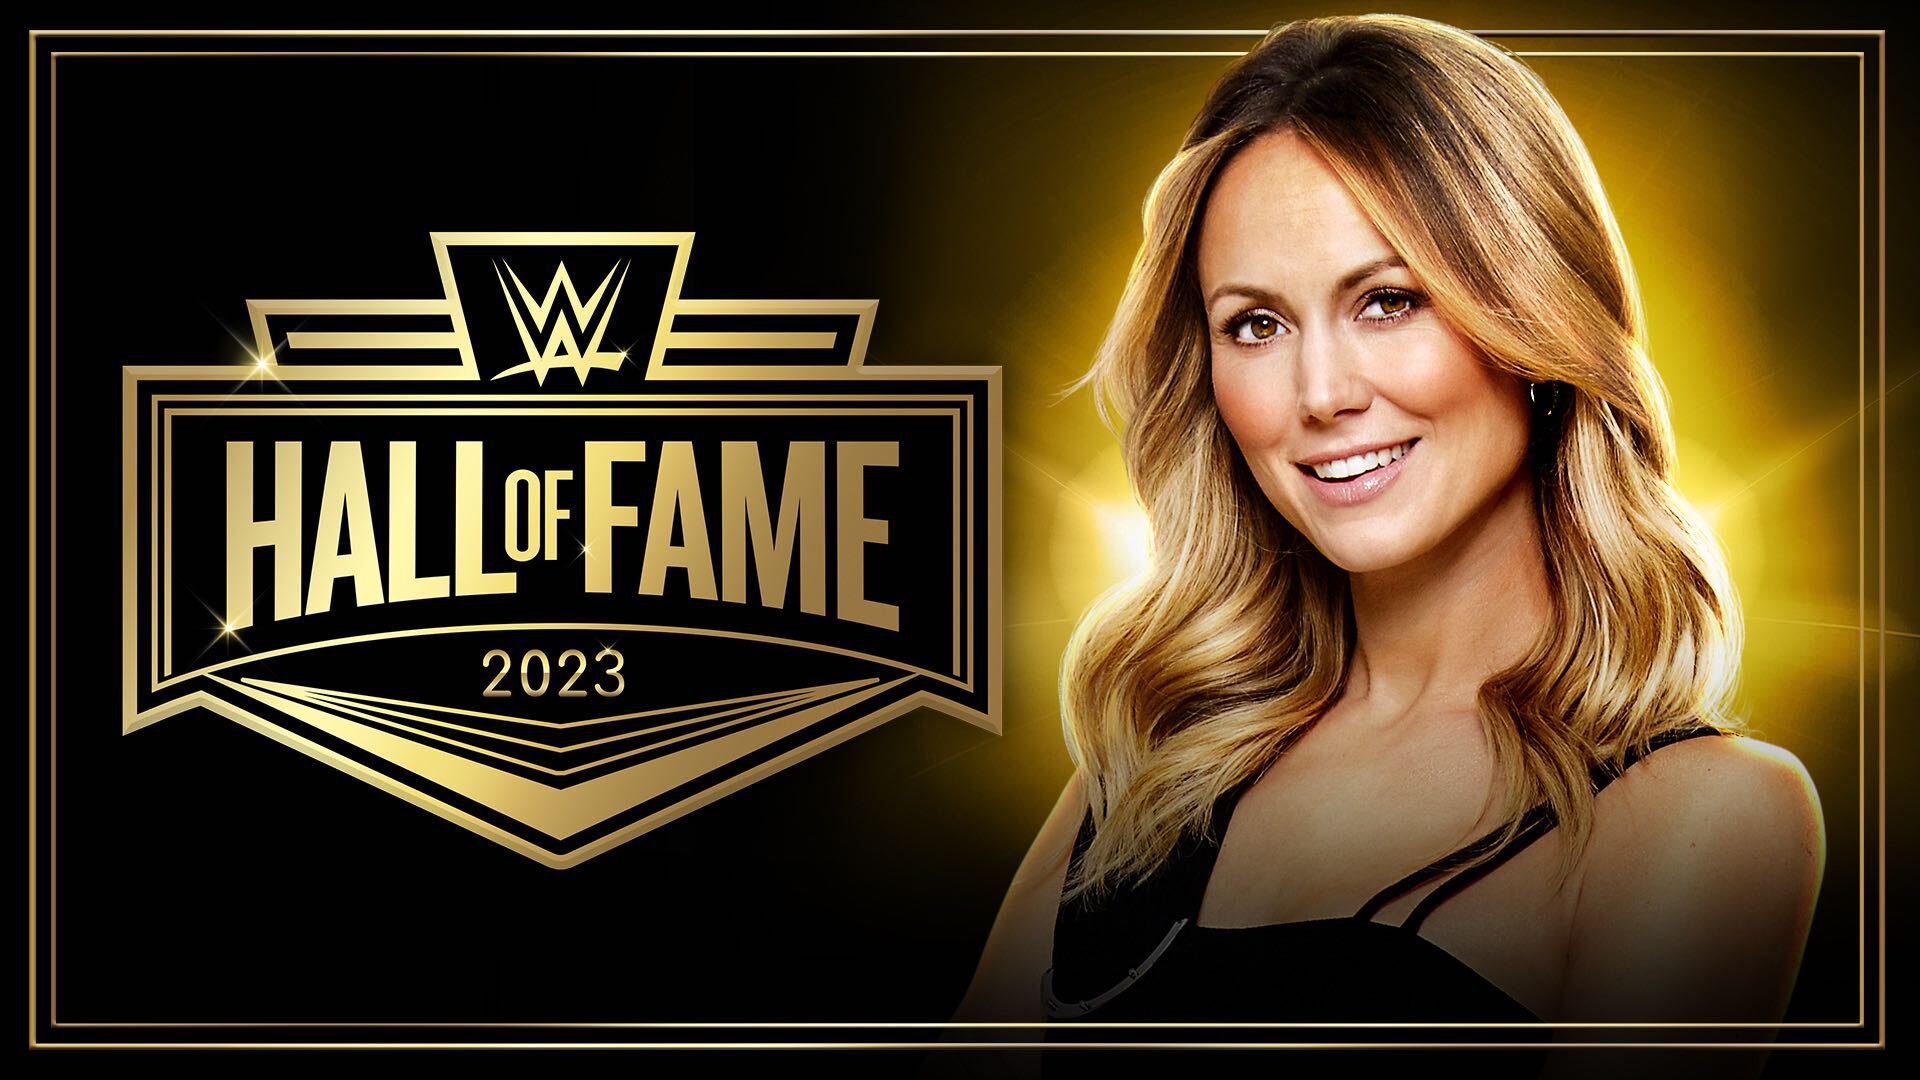 Stacy Keibler announced for WWE Hall of Fame, Class of 2023 WWE